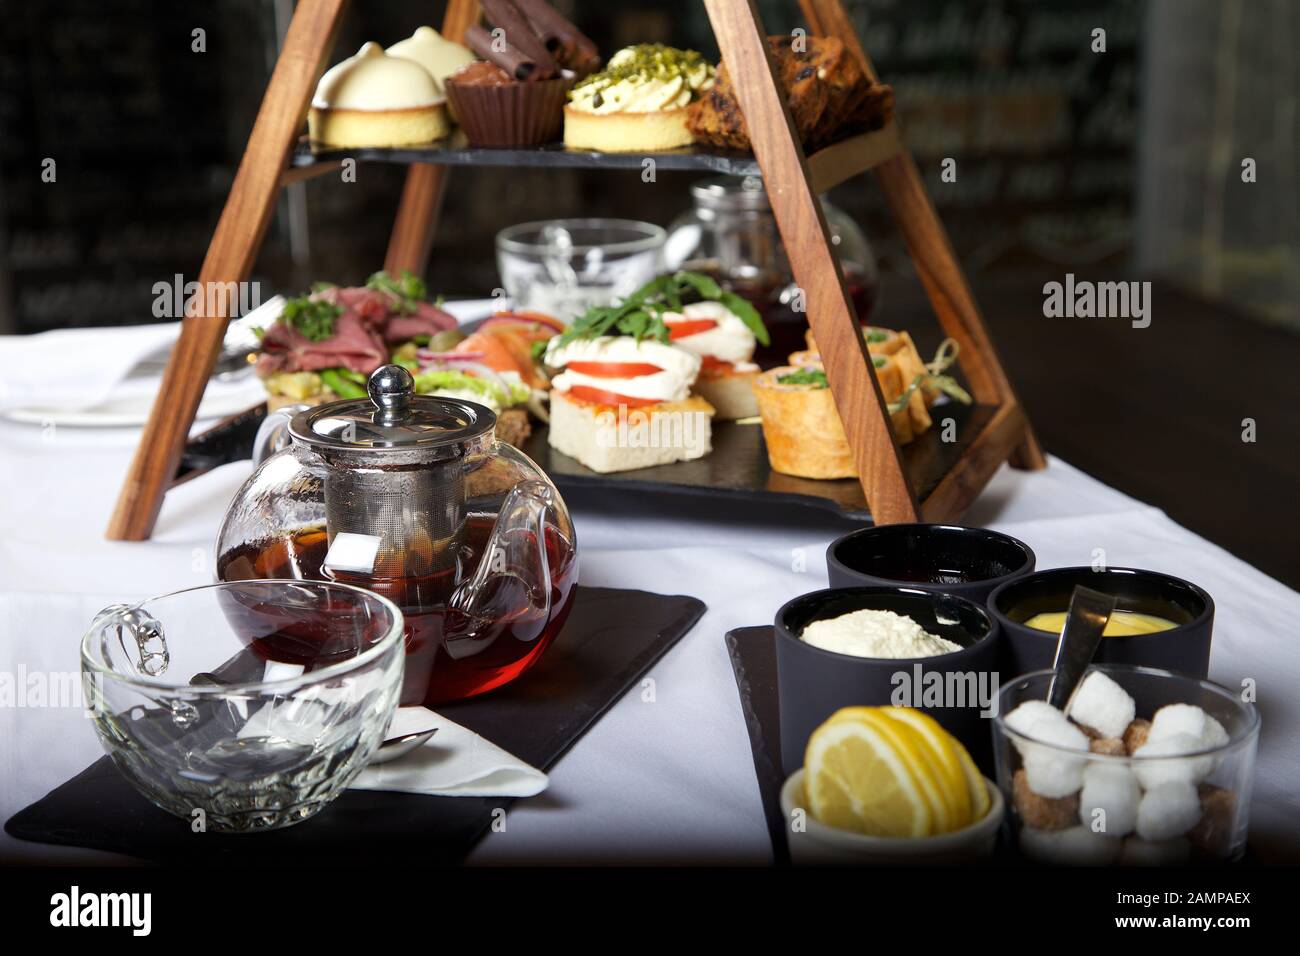 Afternoon tea table setting. Stock Photo